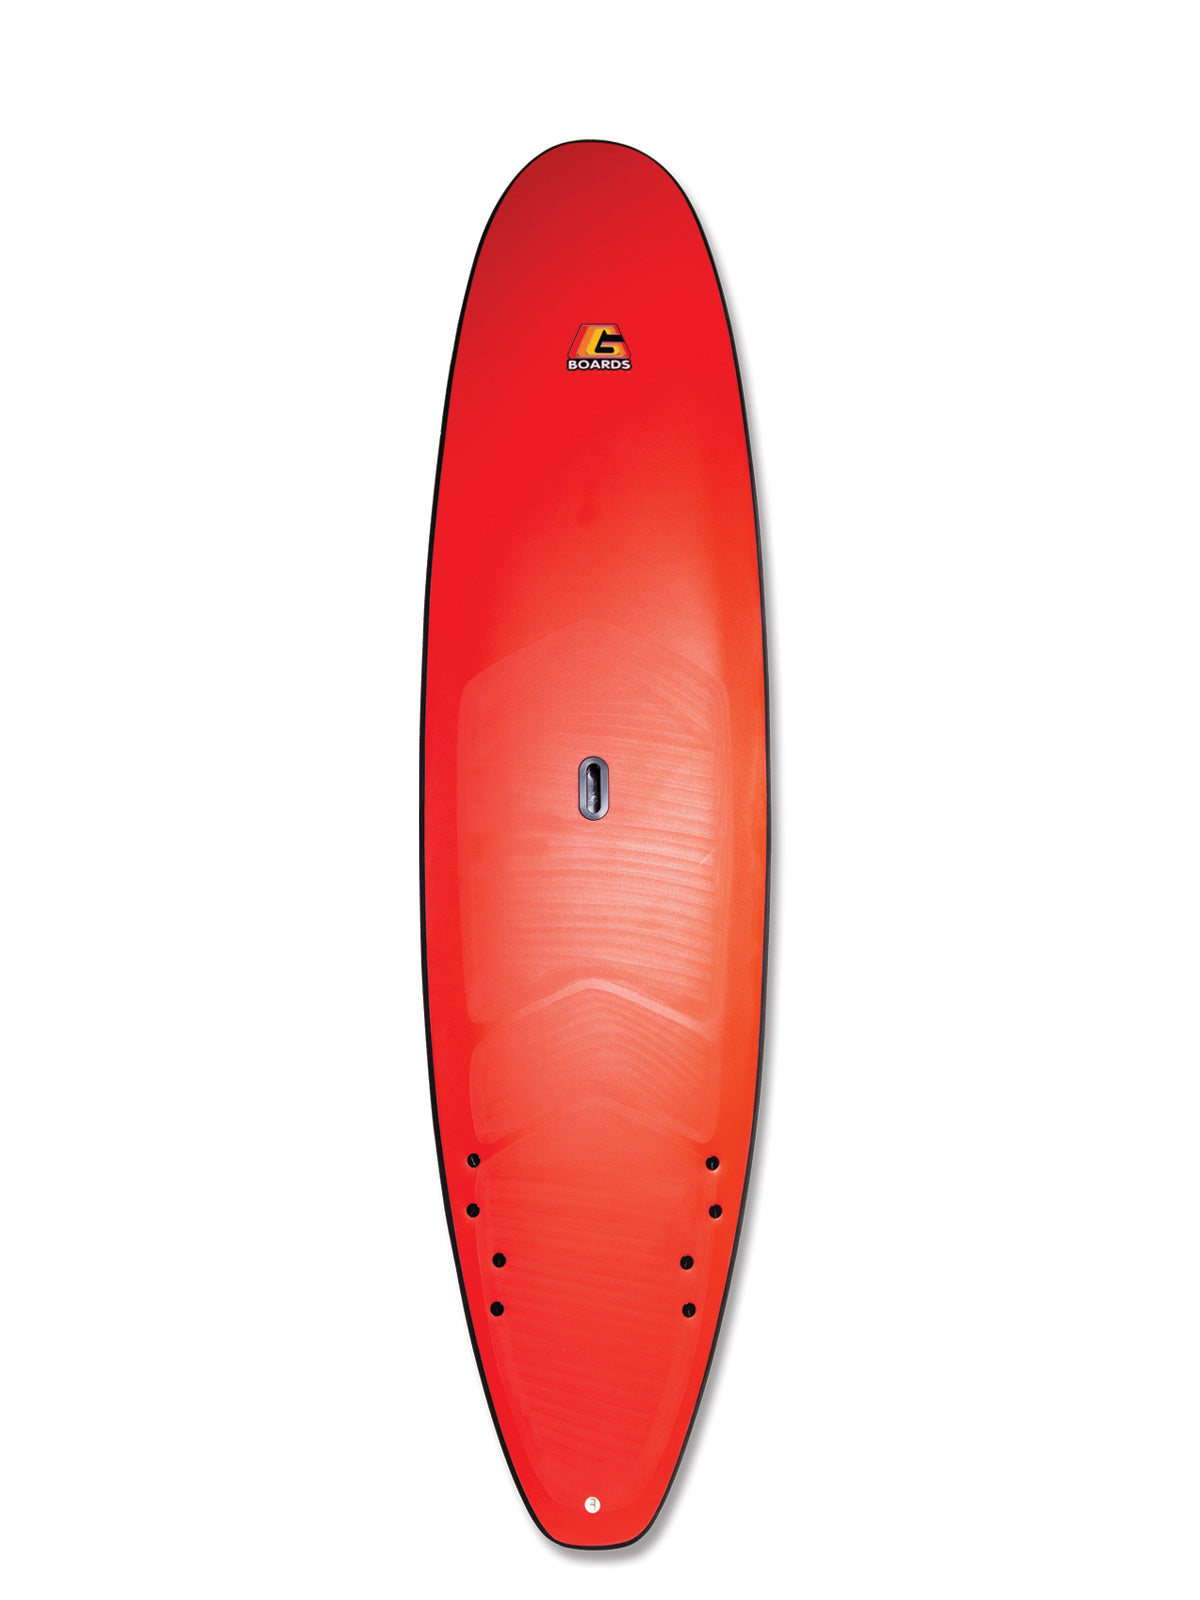 STAND UP PADDLEBOARD 9'6 x 30" x 4 1/2" (157 Litres)